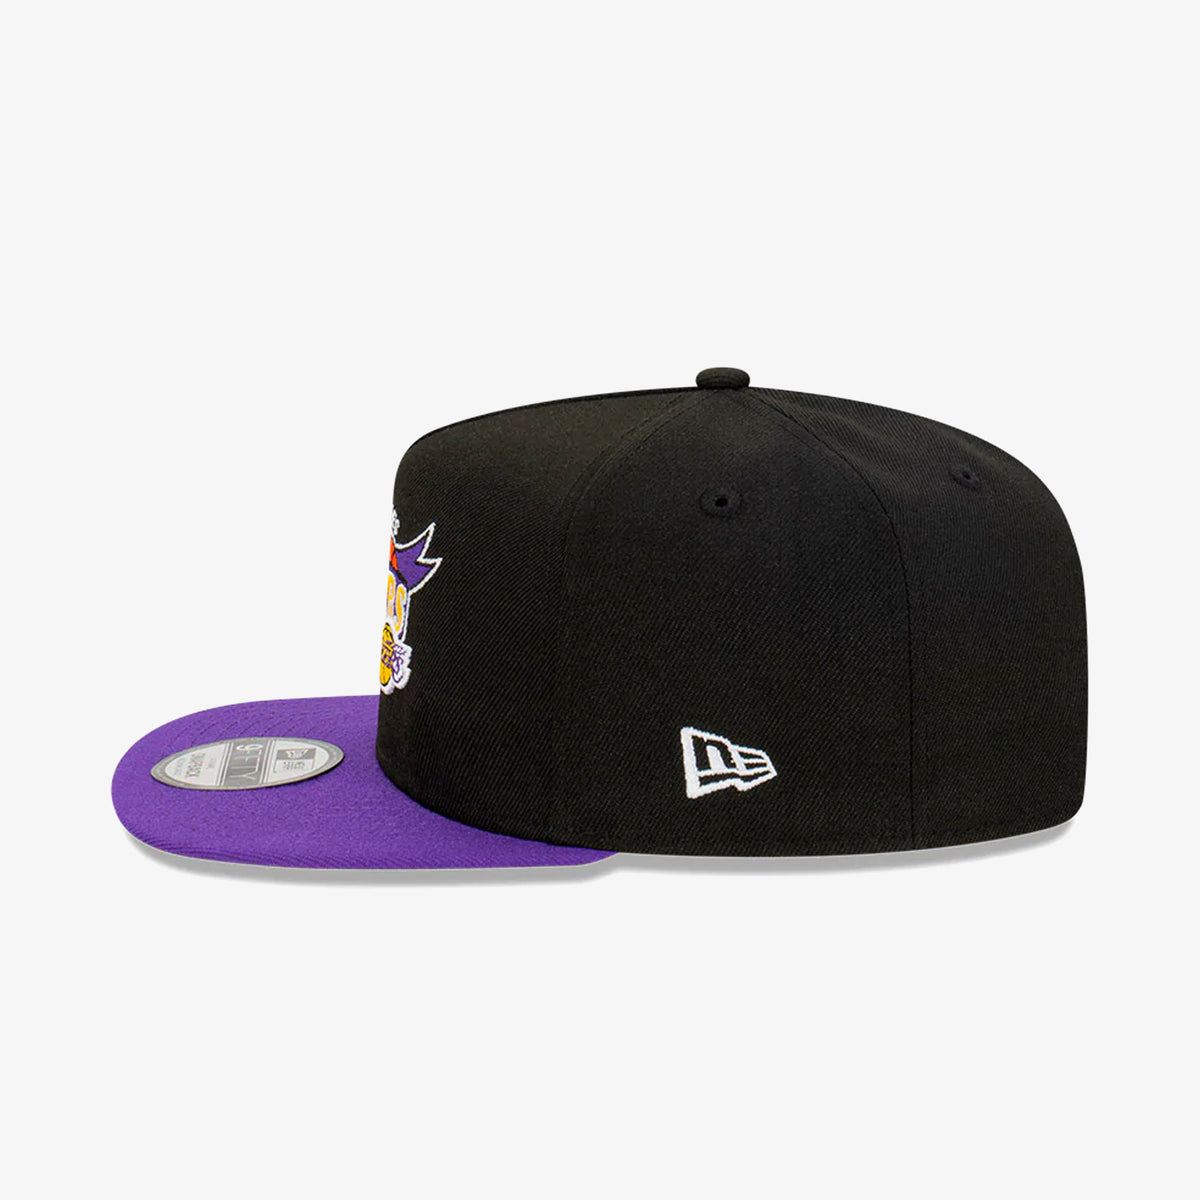 Los Angeles Lakers 9Fifty Banner Ball Snapback